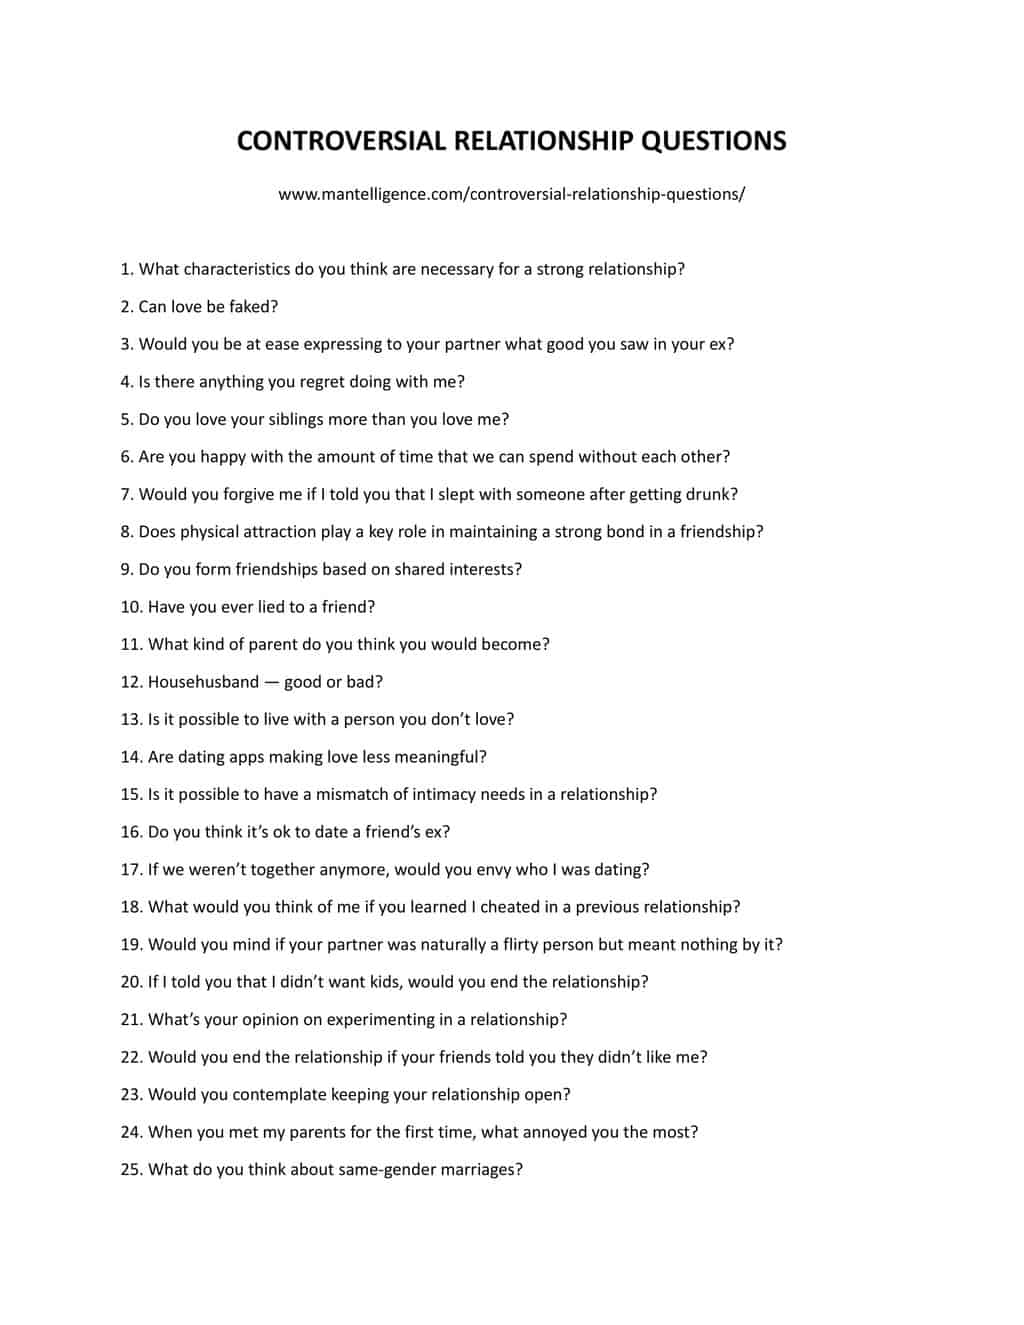 List of Questions